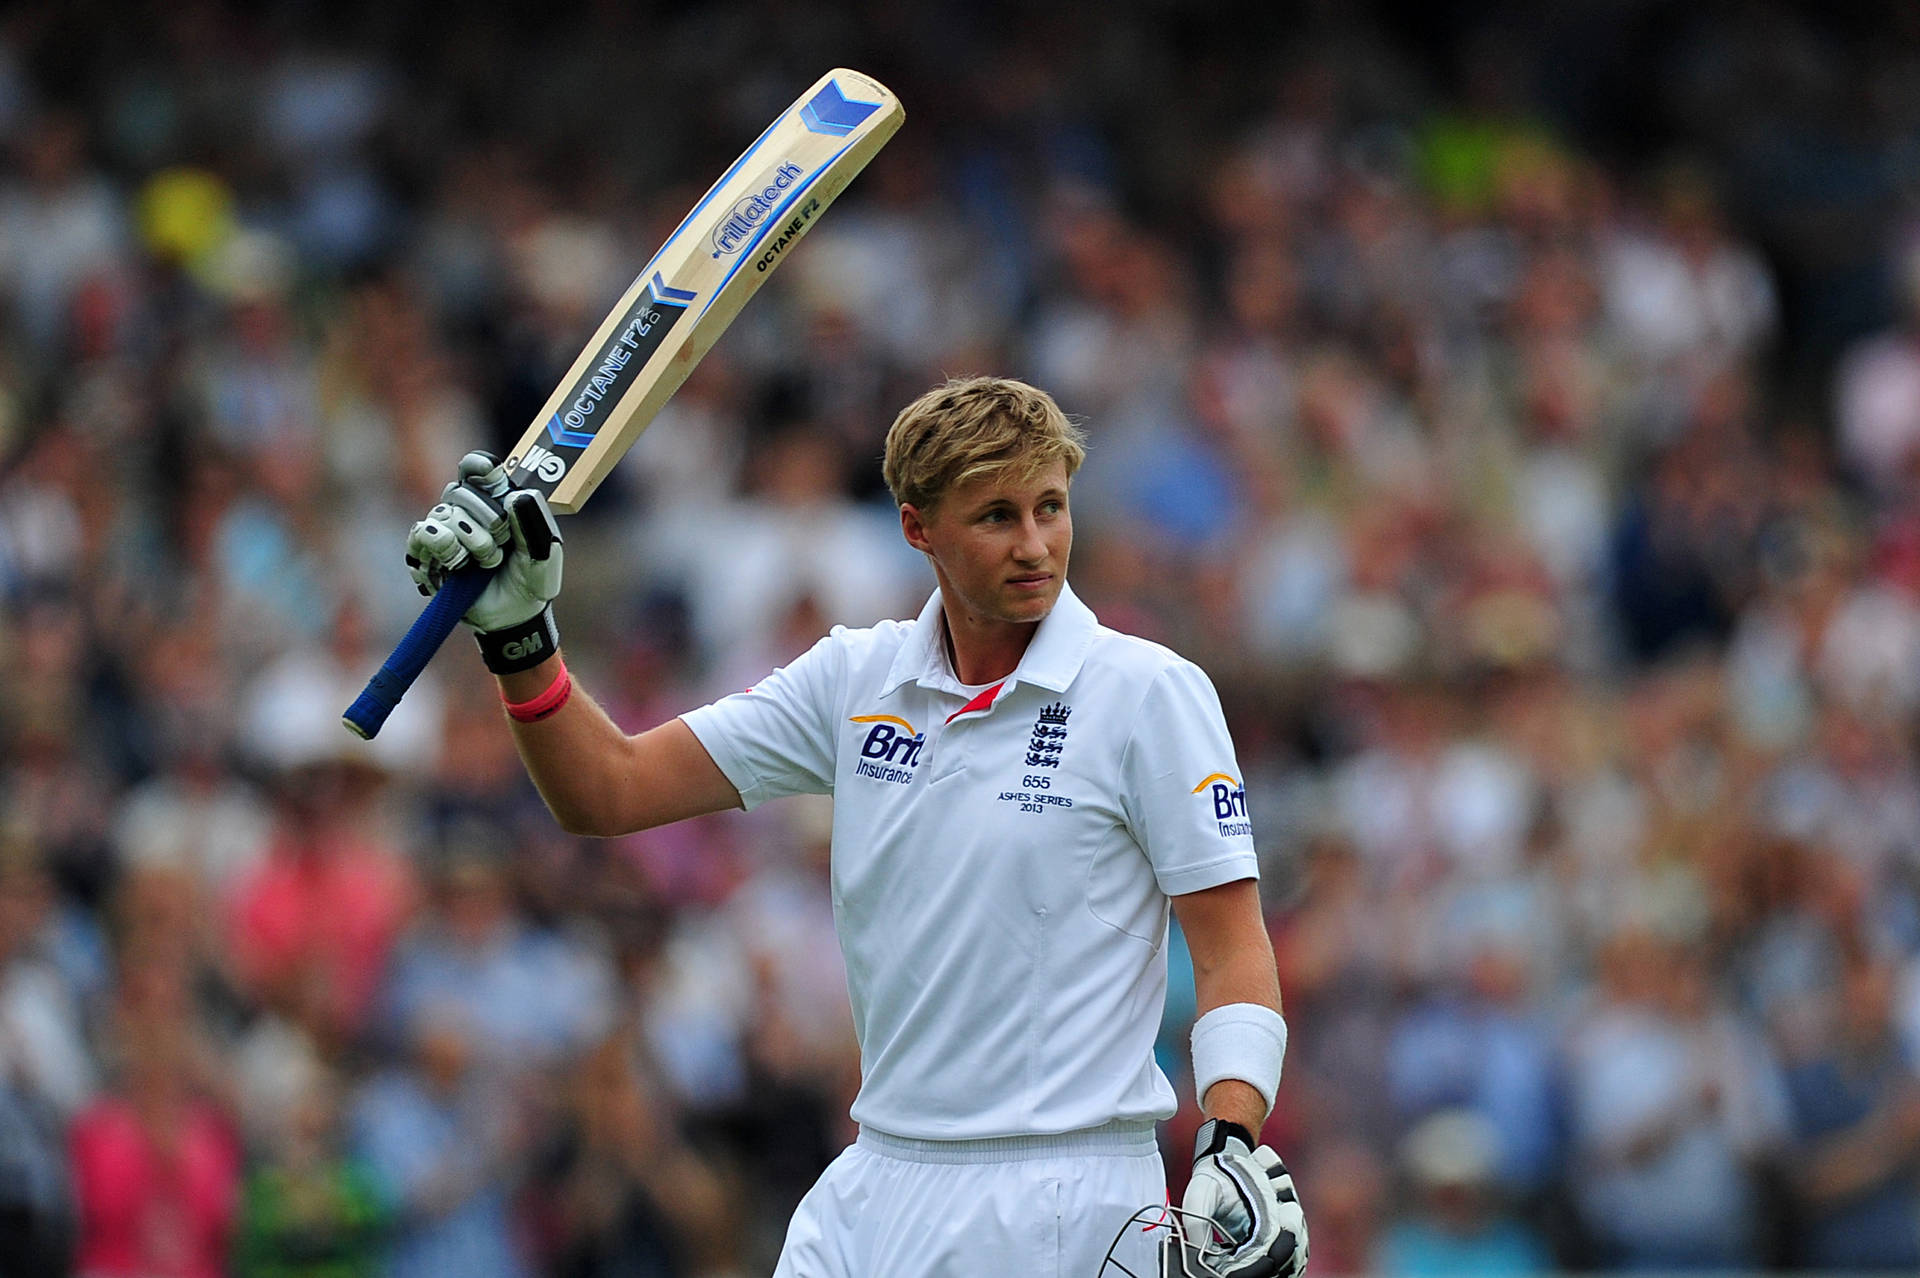 A Focused Joe Root During A Cricket Match Background